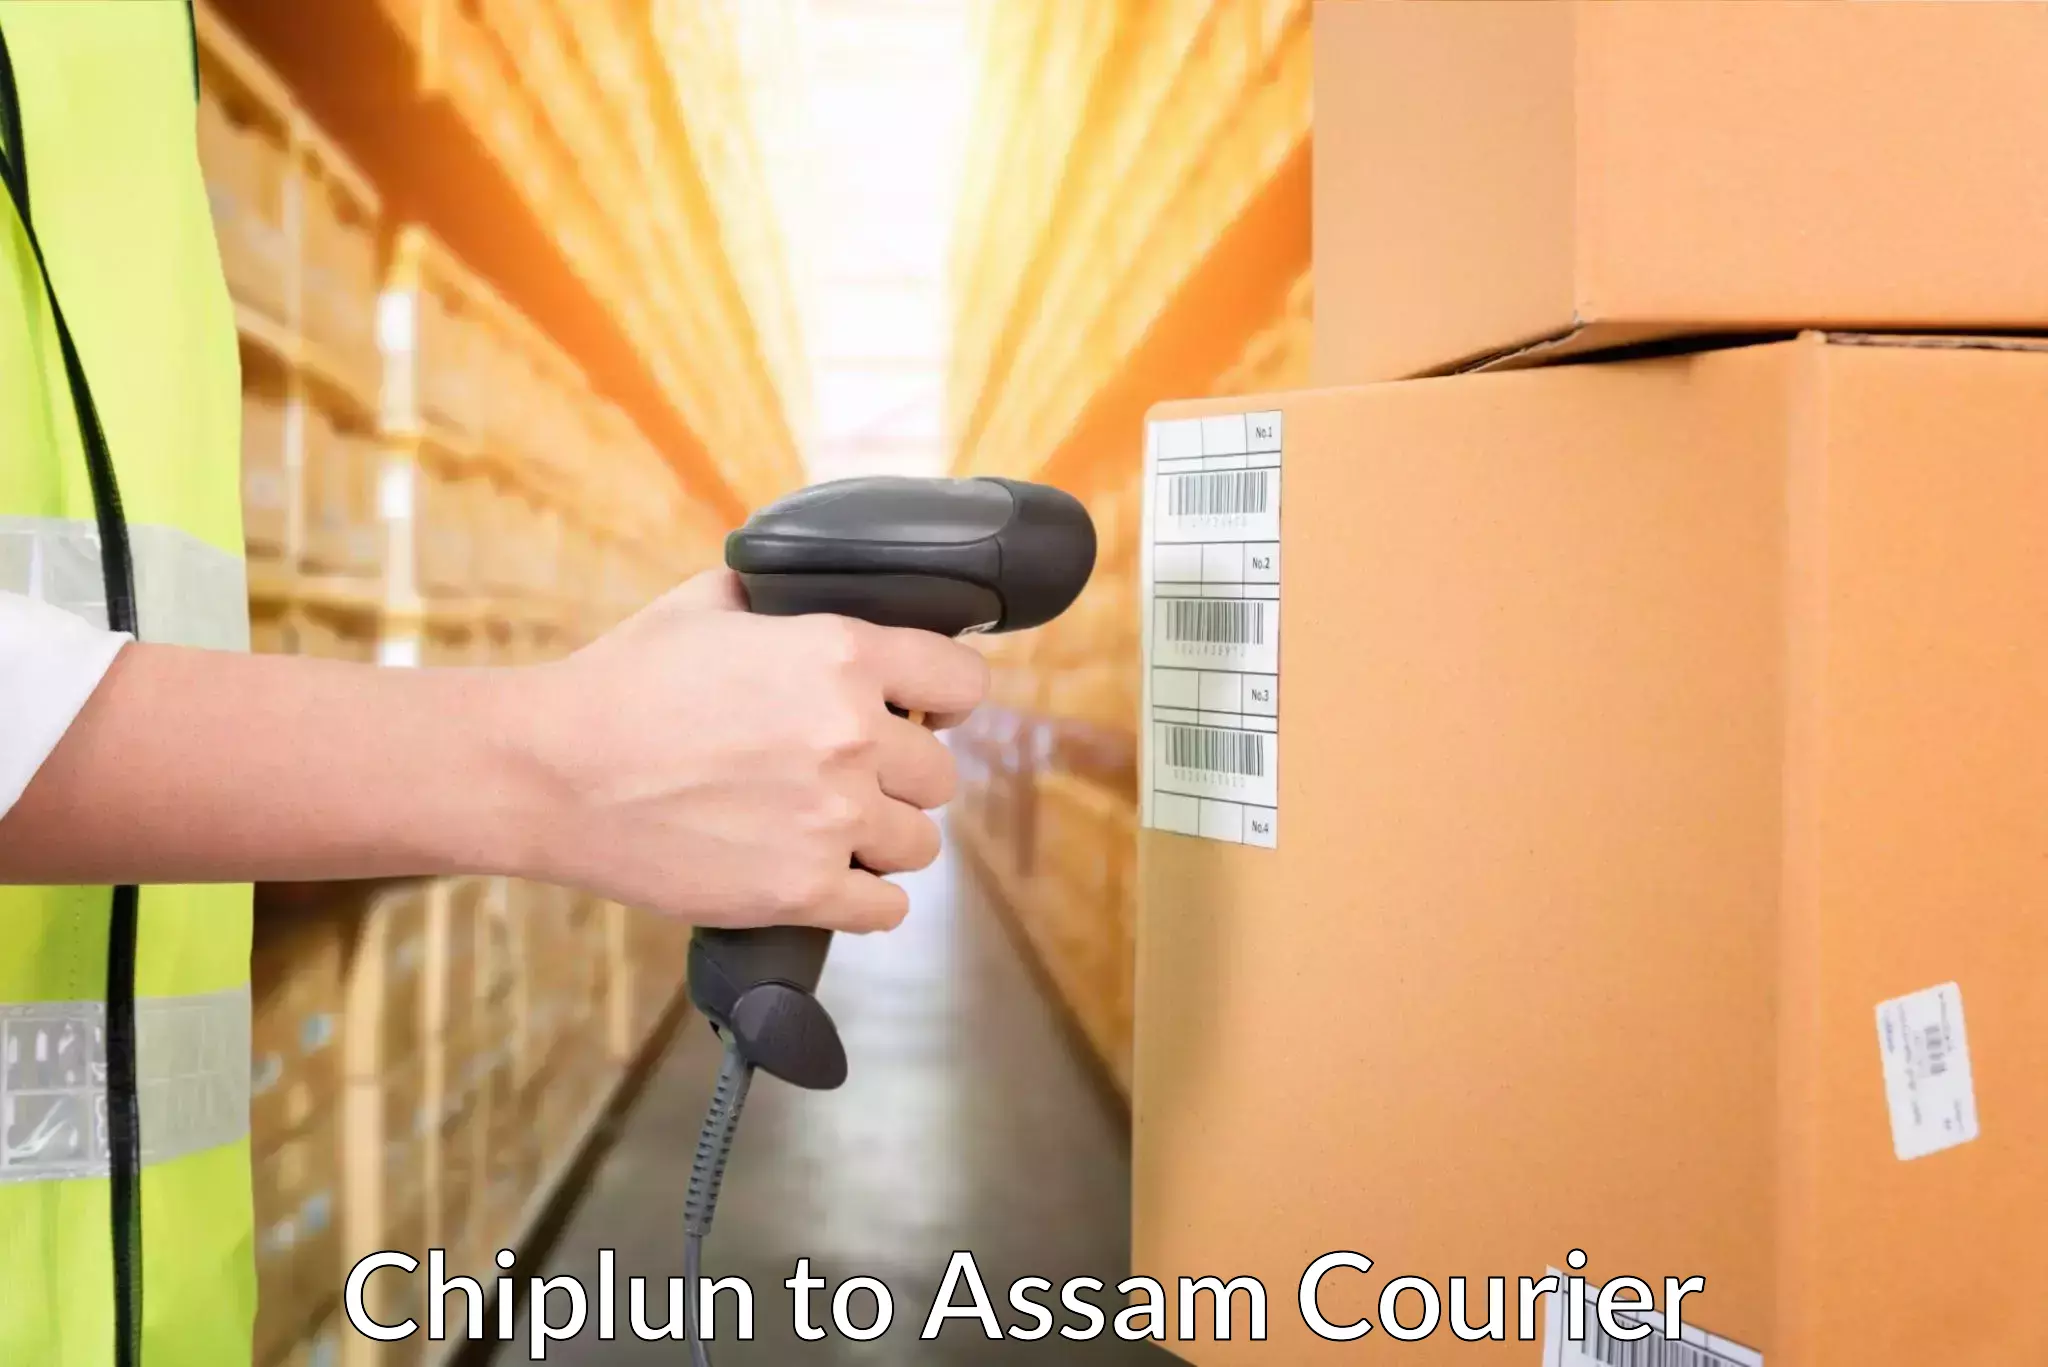 Global shipping networks Chiplun to Kalain